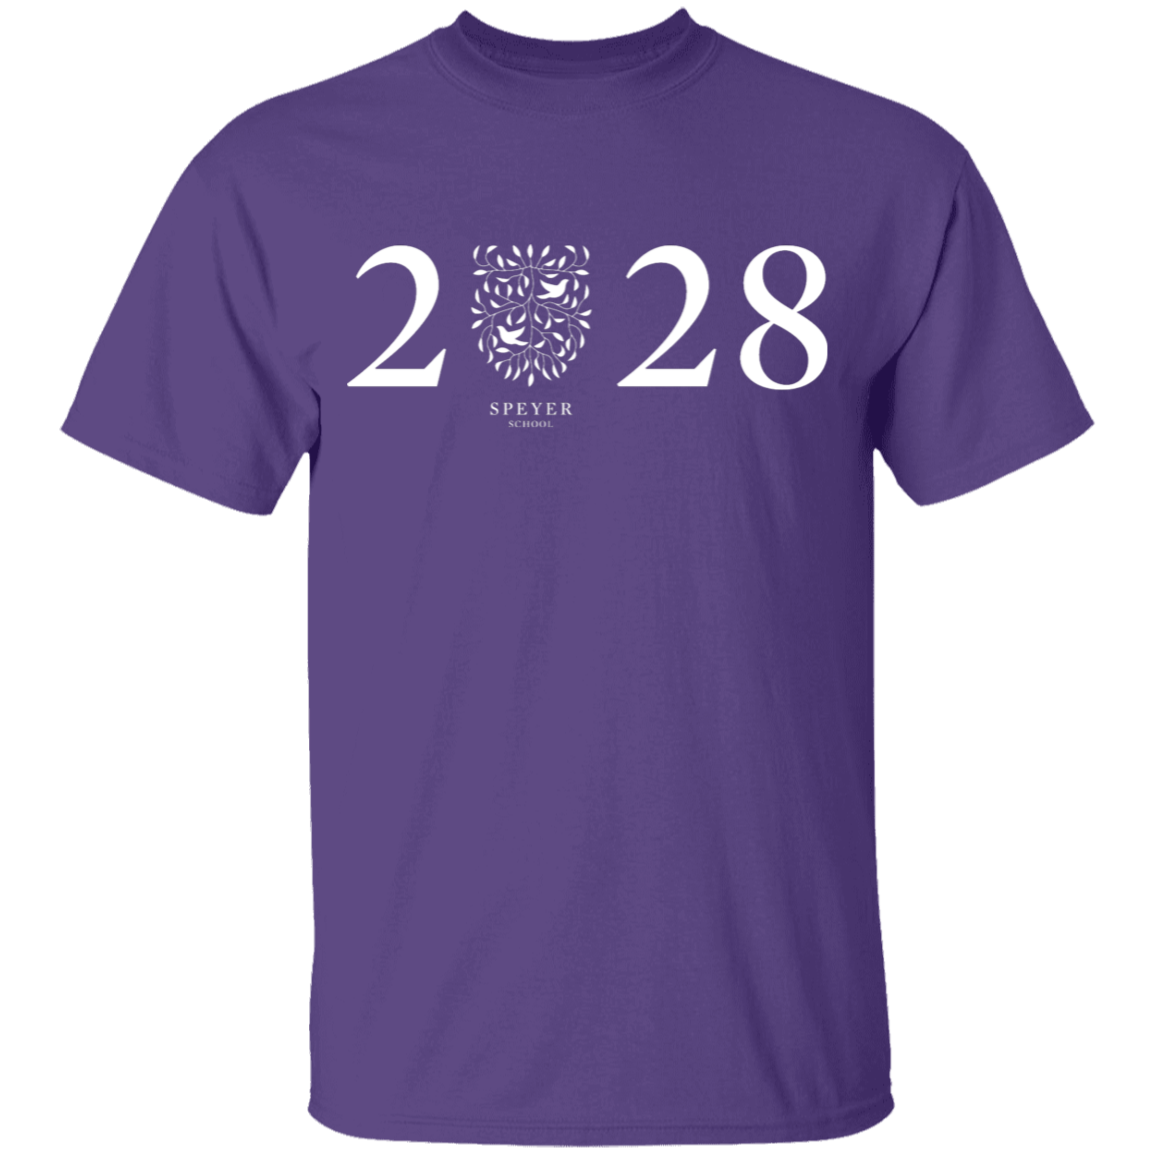 Class of 2028 T-Shirt, Youth SIzes